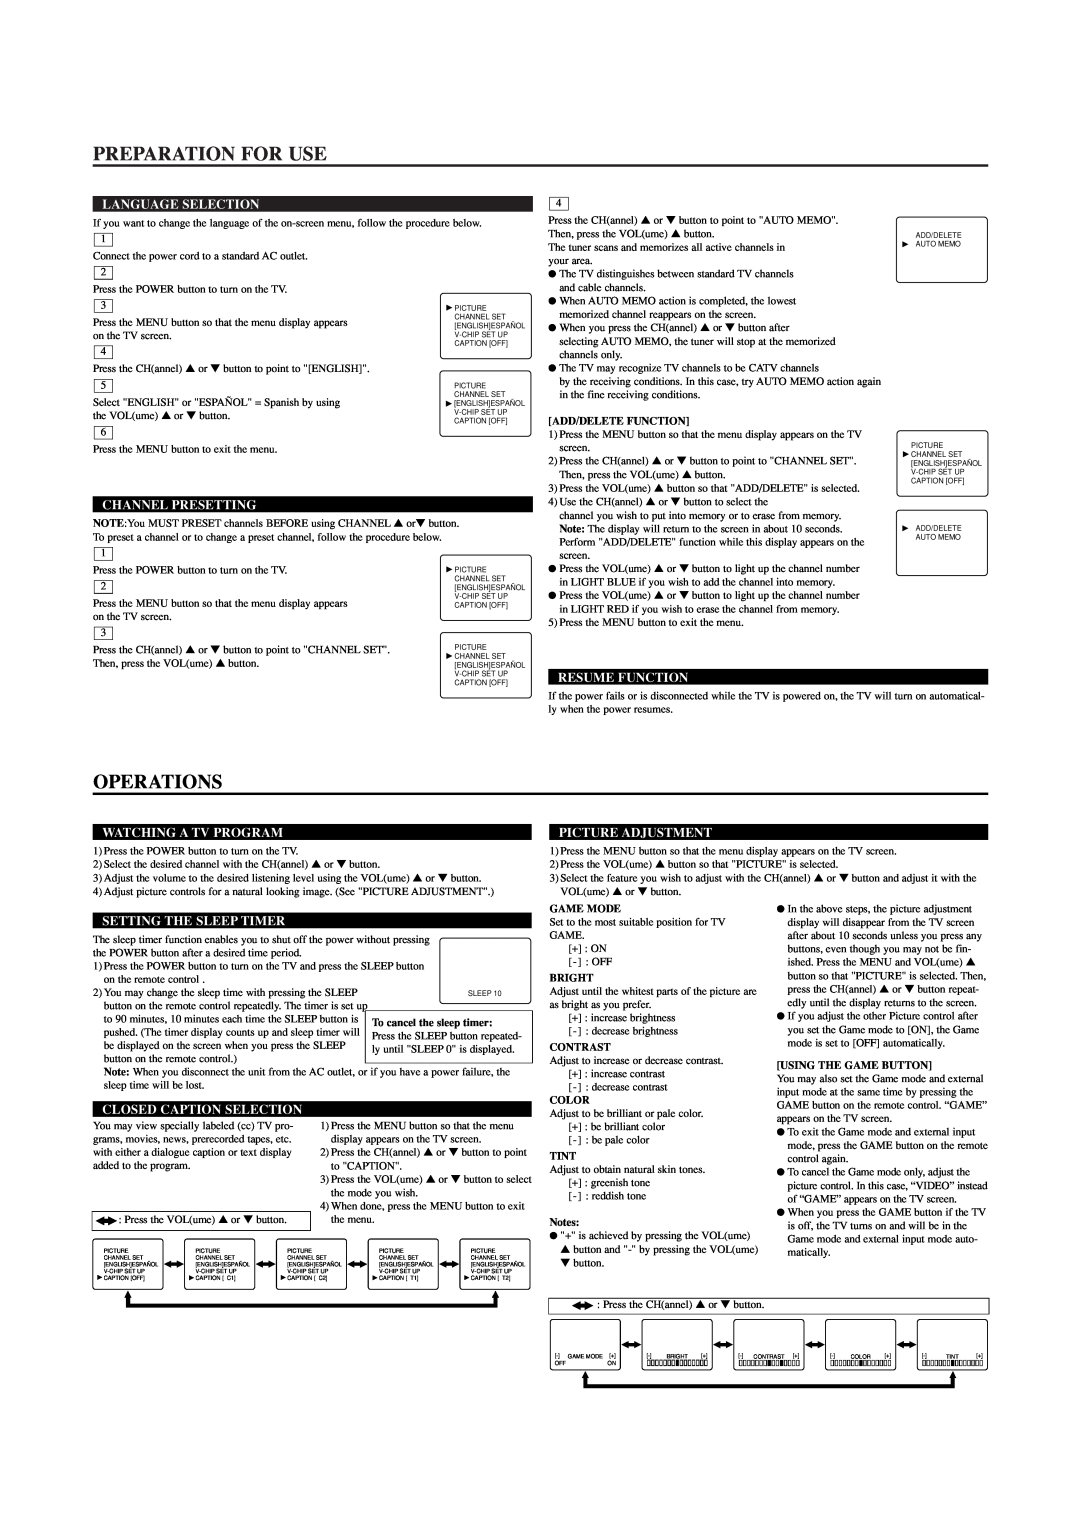 Symphonic ST413C, ST419C Preparation For Use, Operations, Language Selection, Channel Presetting, Resume Function, Bright 